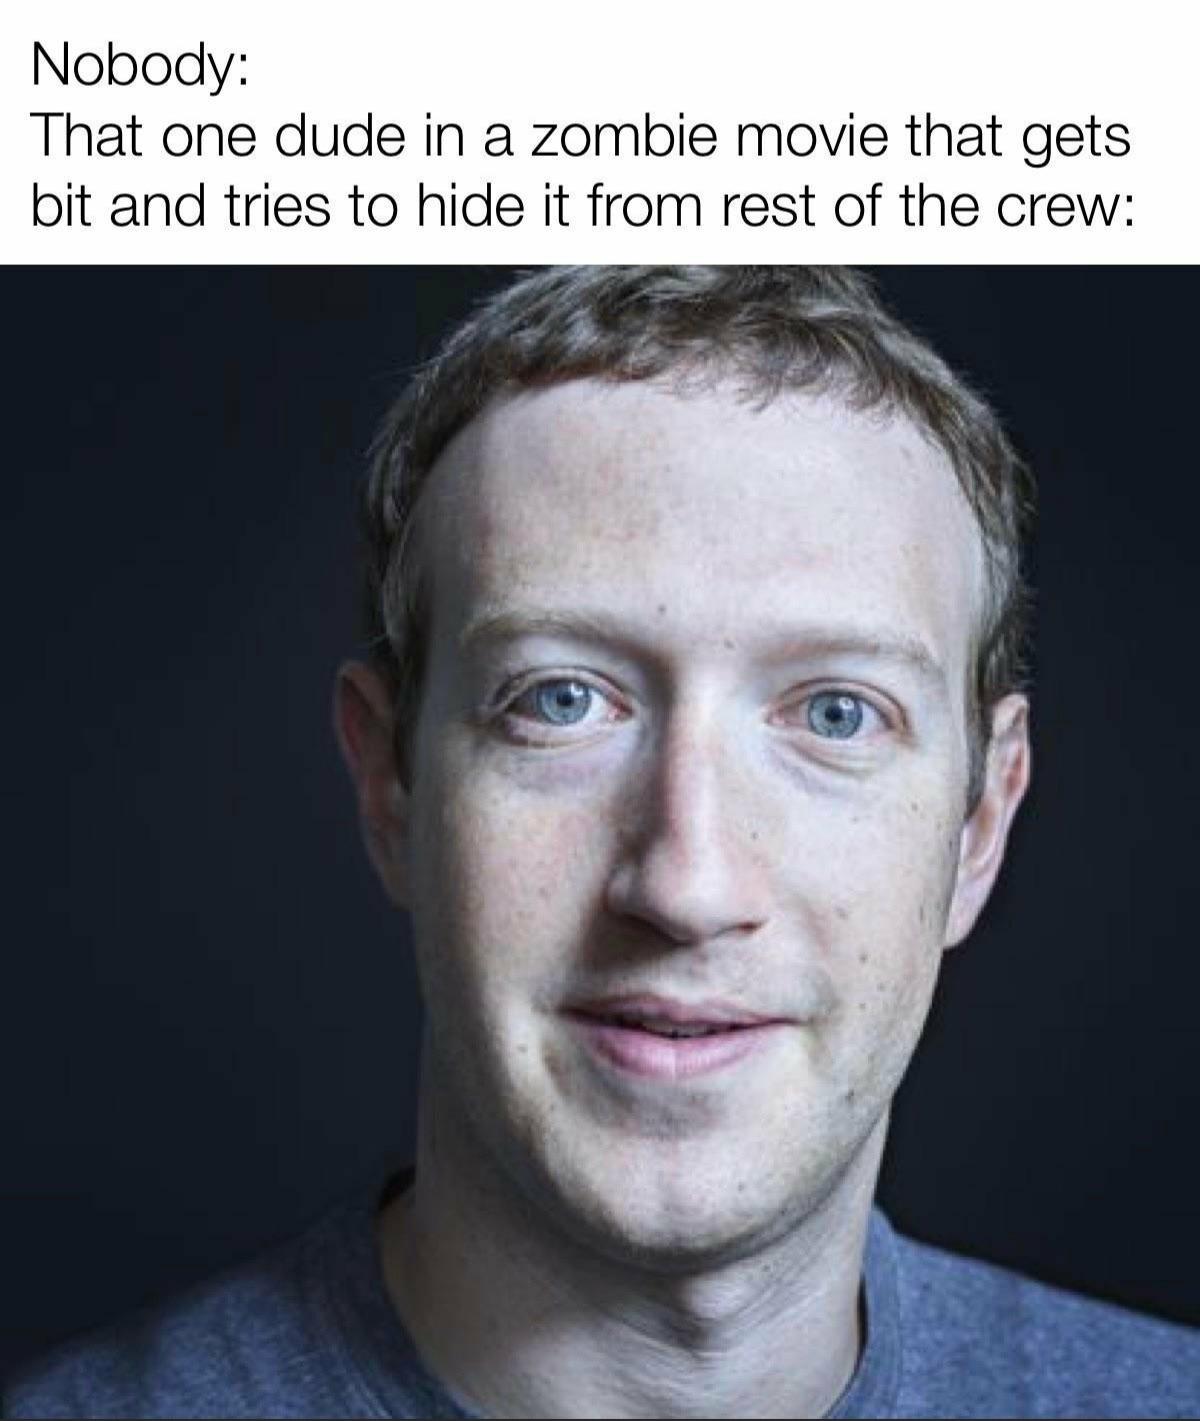 mark zuckerberg - Nobody That one dude in a zombie movie that gets bit and tries to hide it from rest of the crew